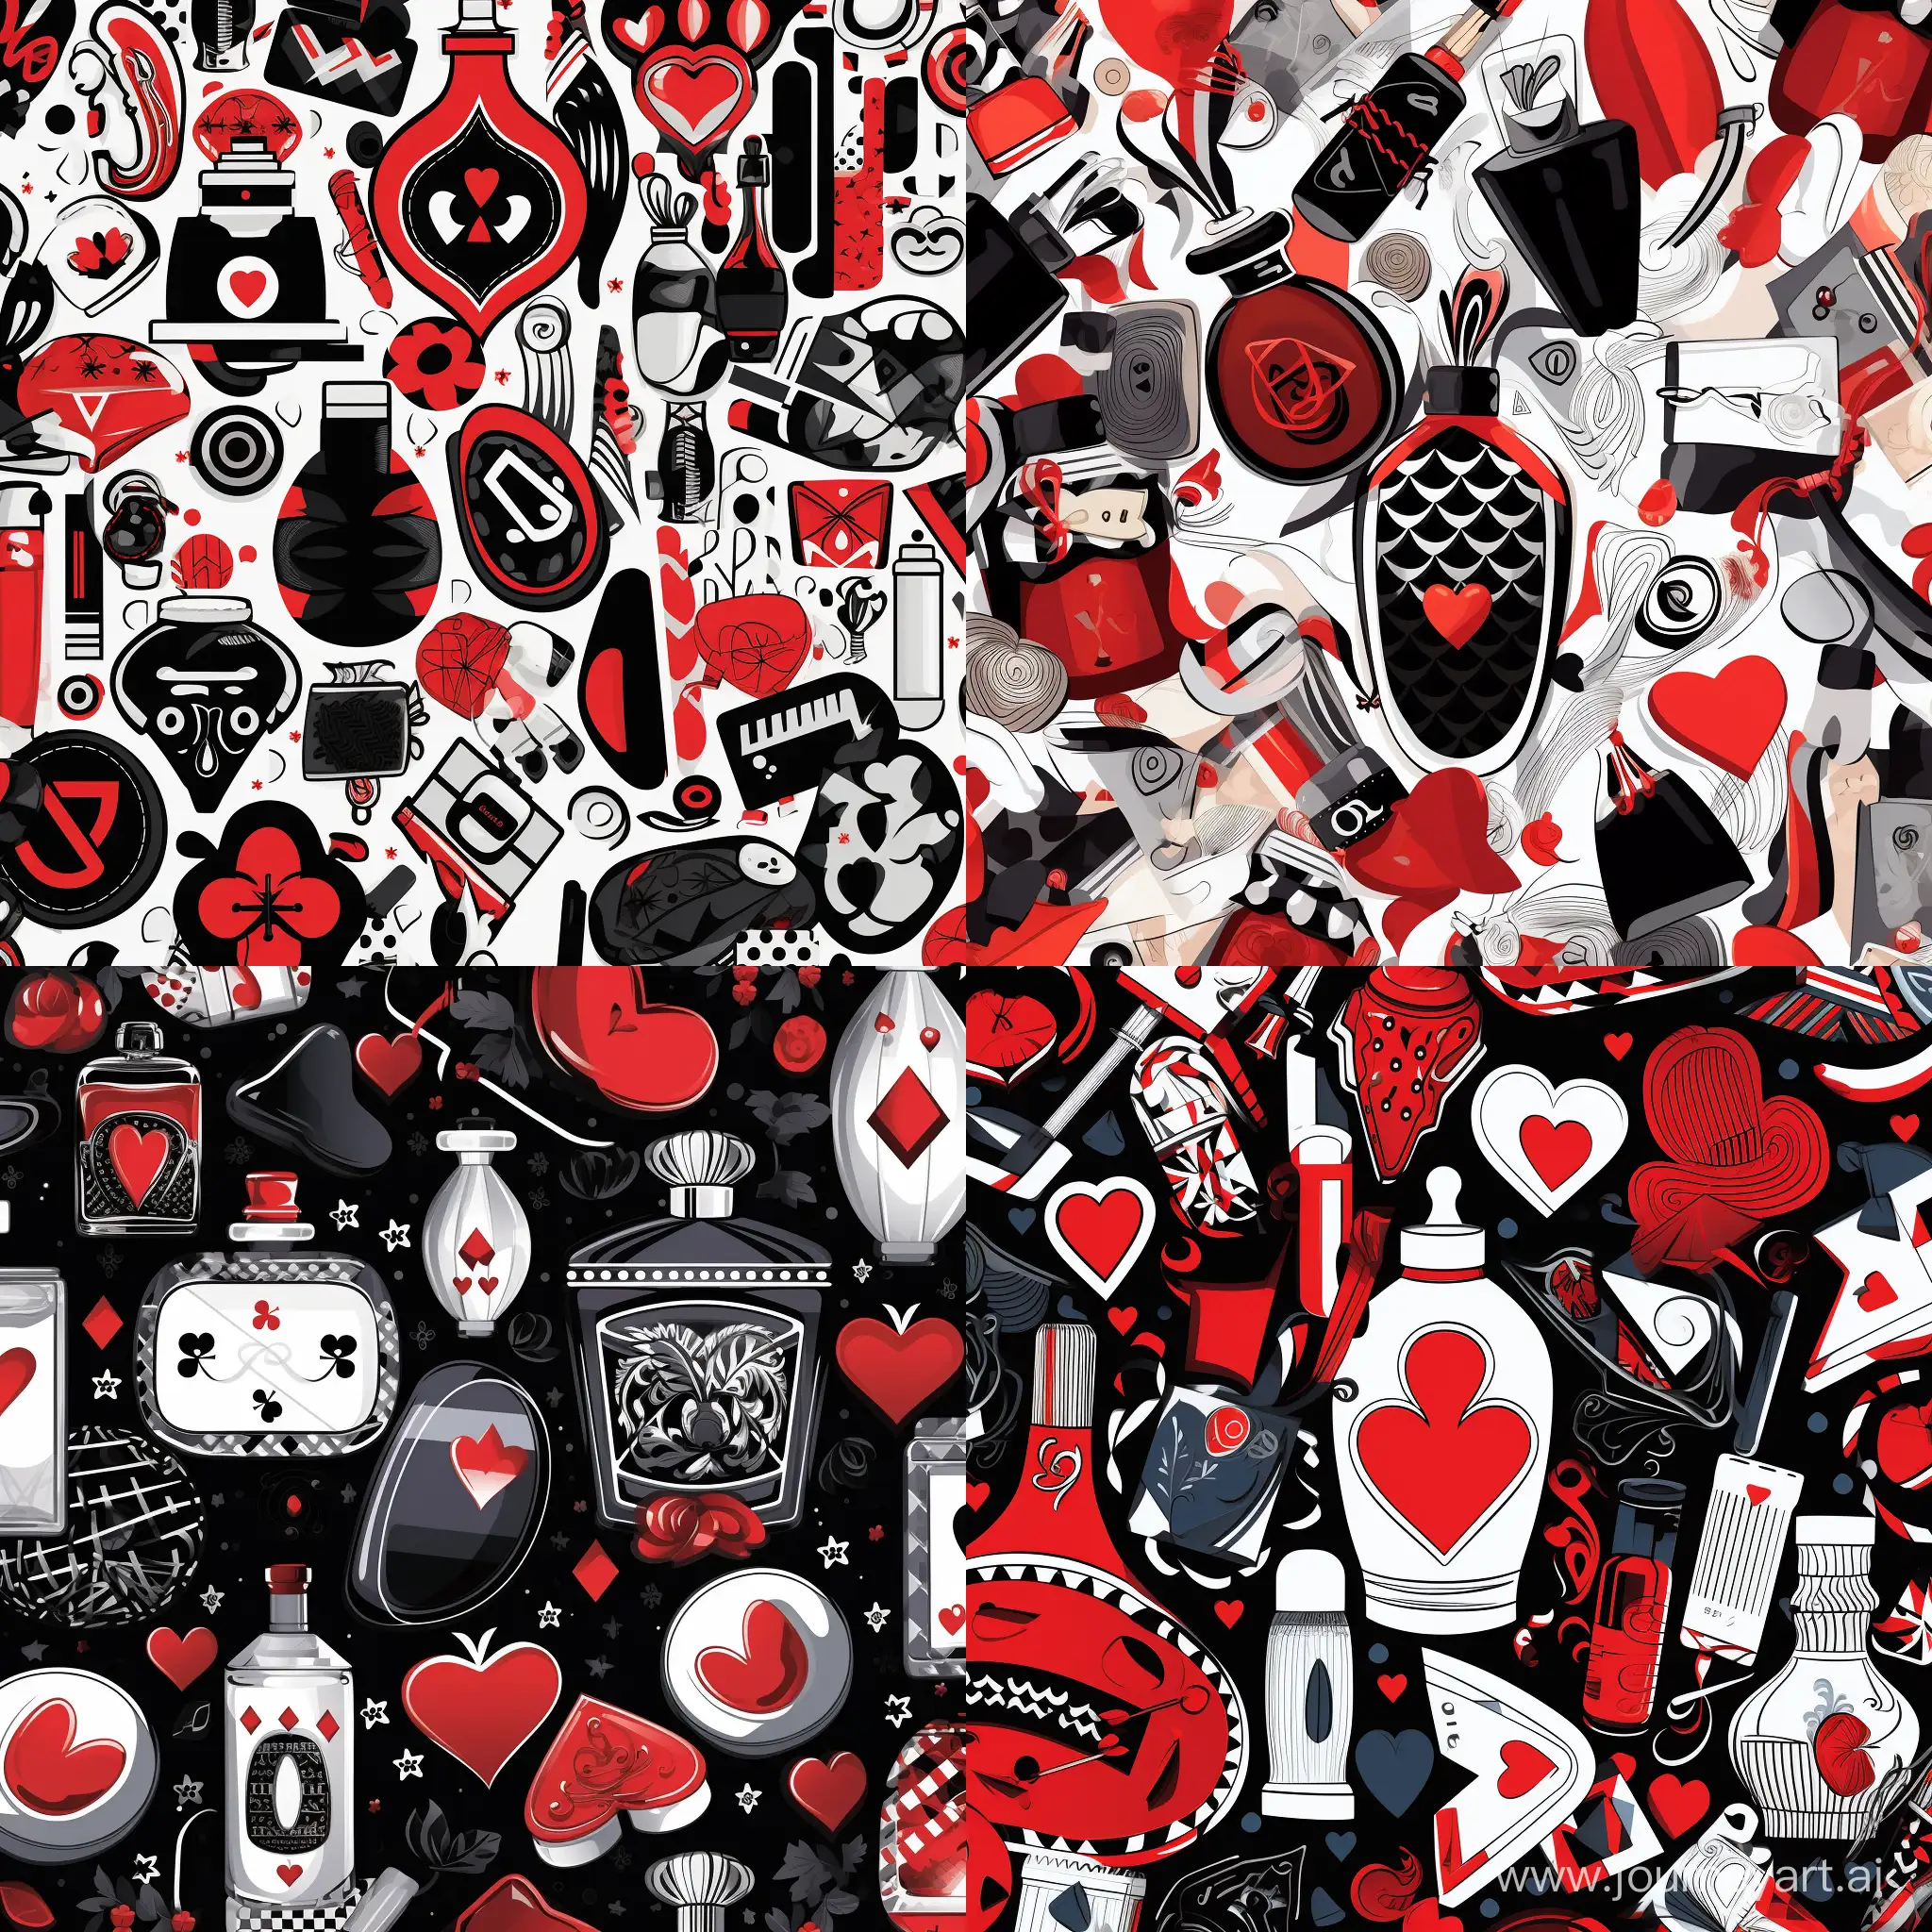 pattern of clubs, designer accessories, perfume bottles, colors black, white, red, gray, cartoon style, pop art style, fashion illustration style